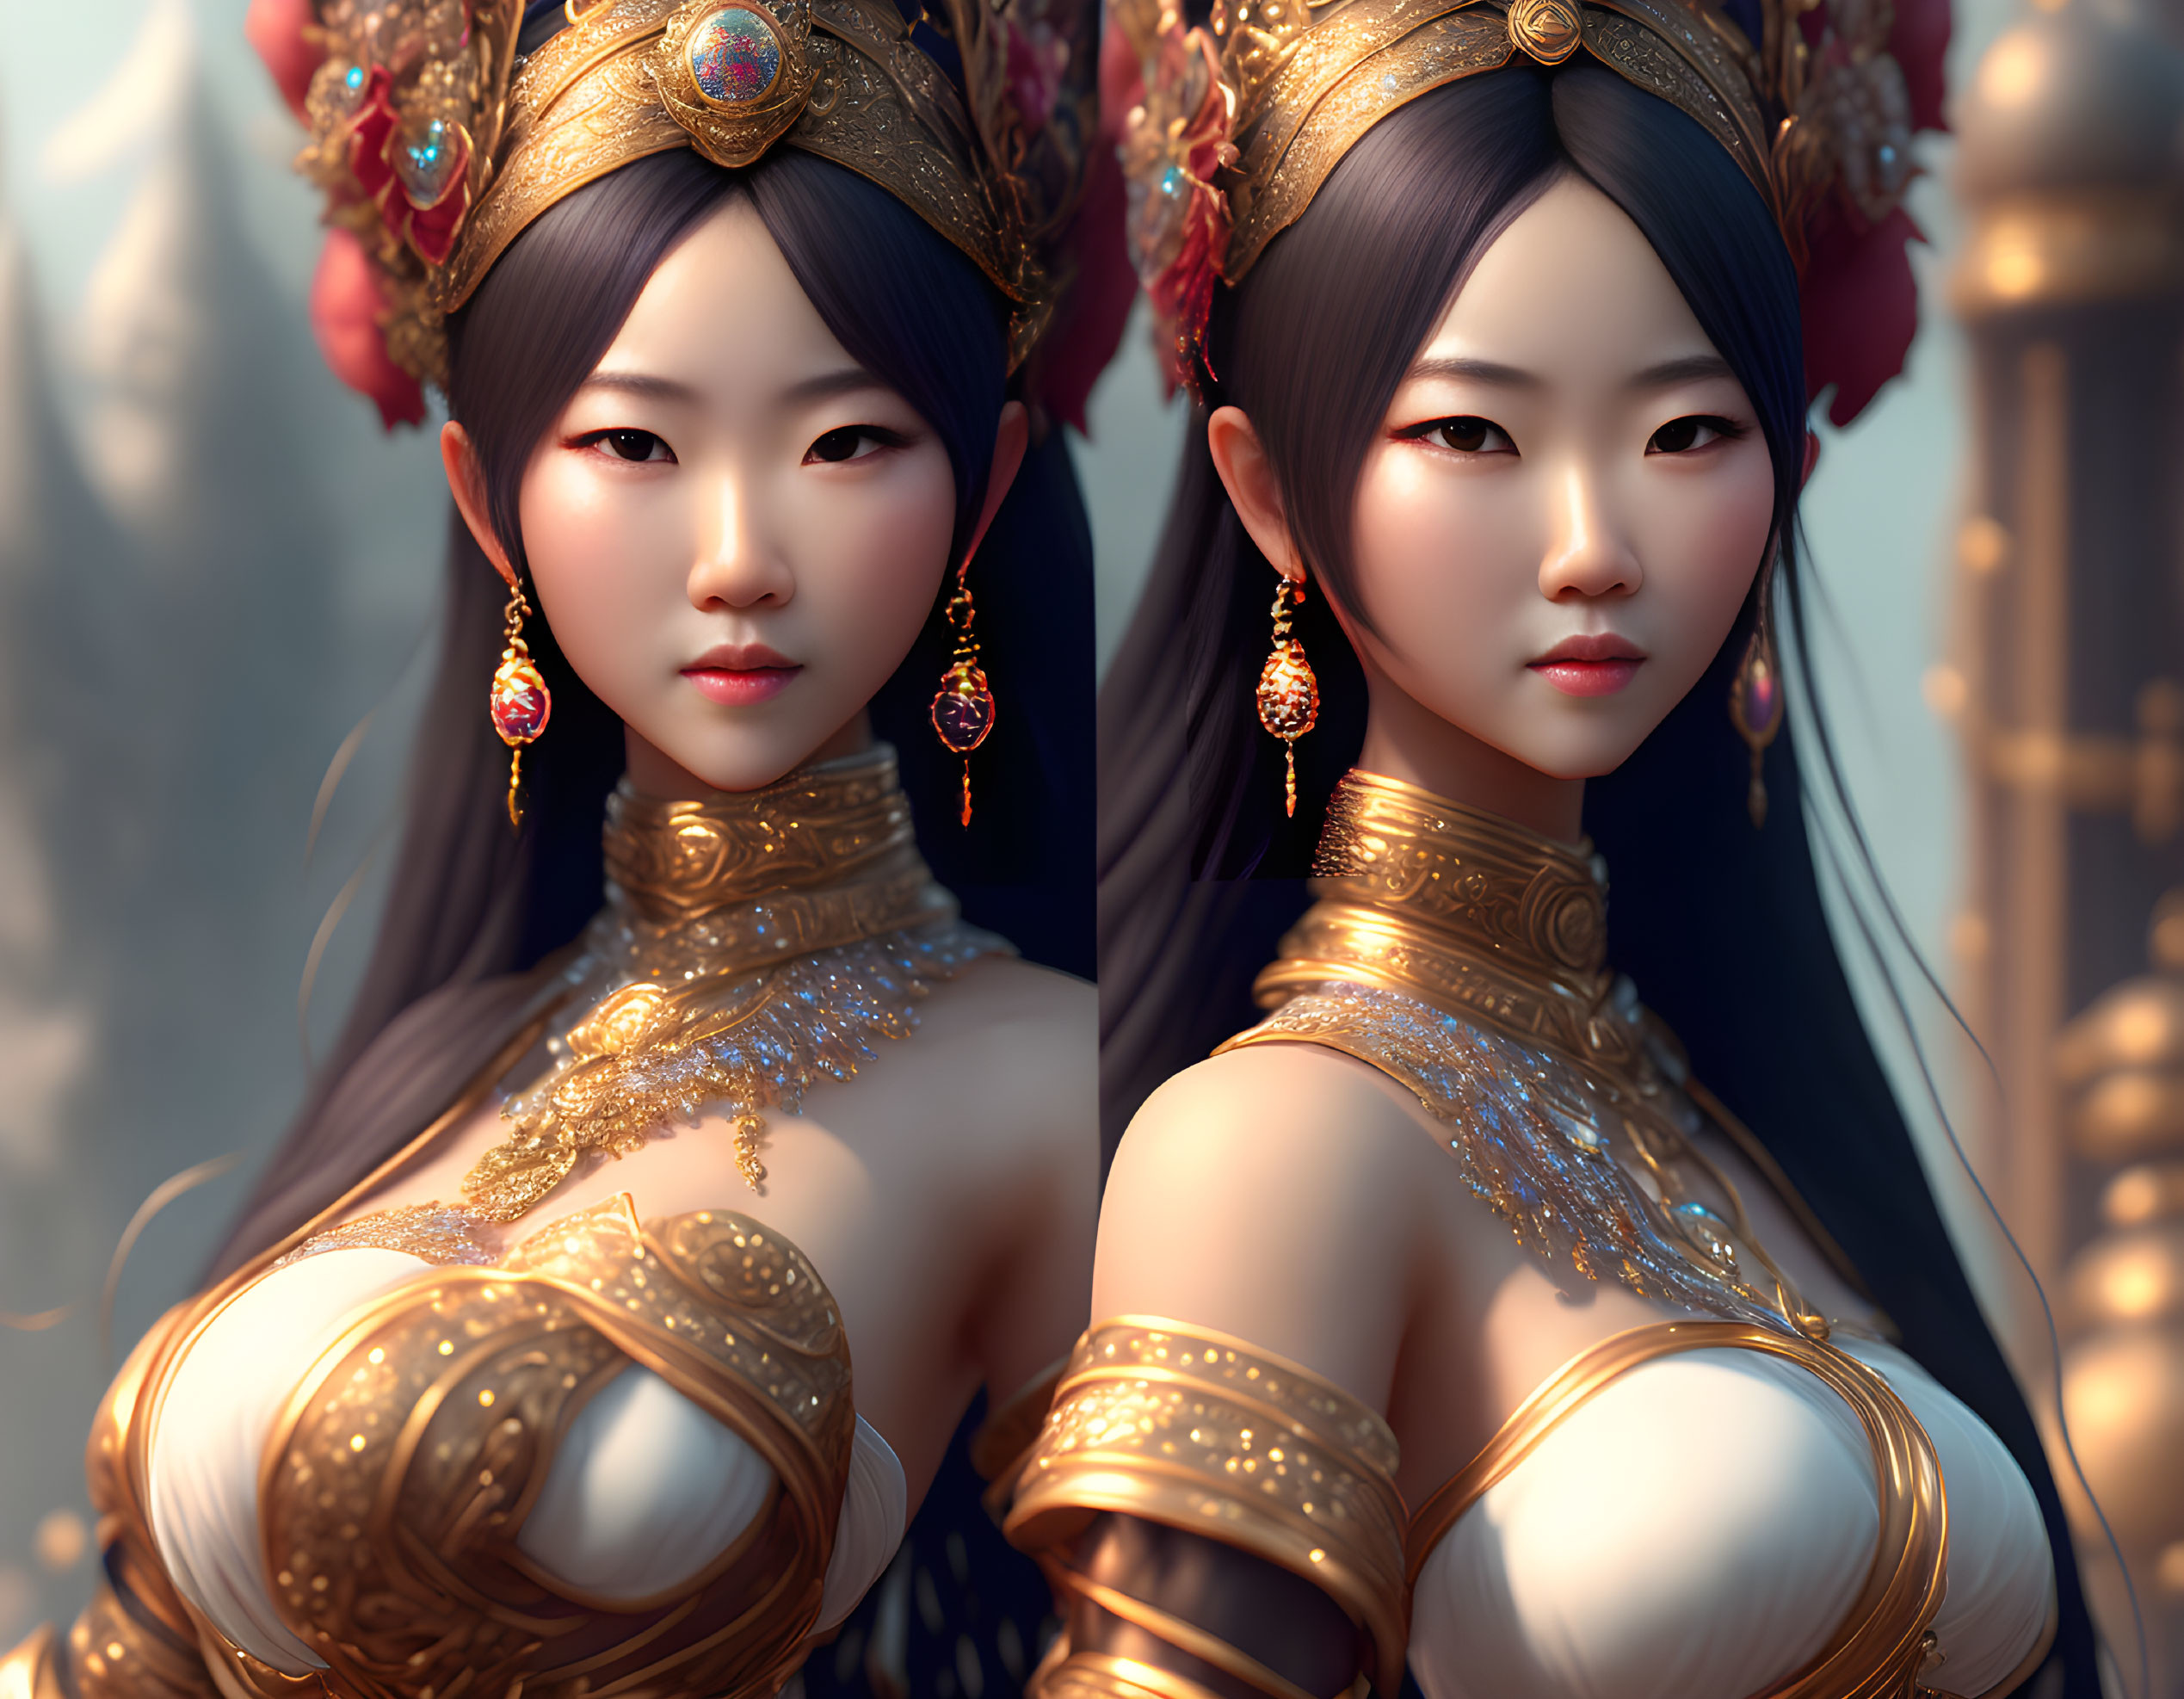 Traditional Asian-inspired woman in ornate gold attire and jewelry.